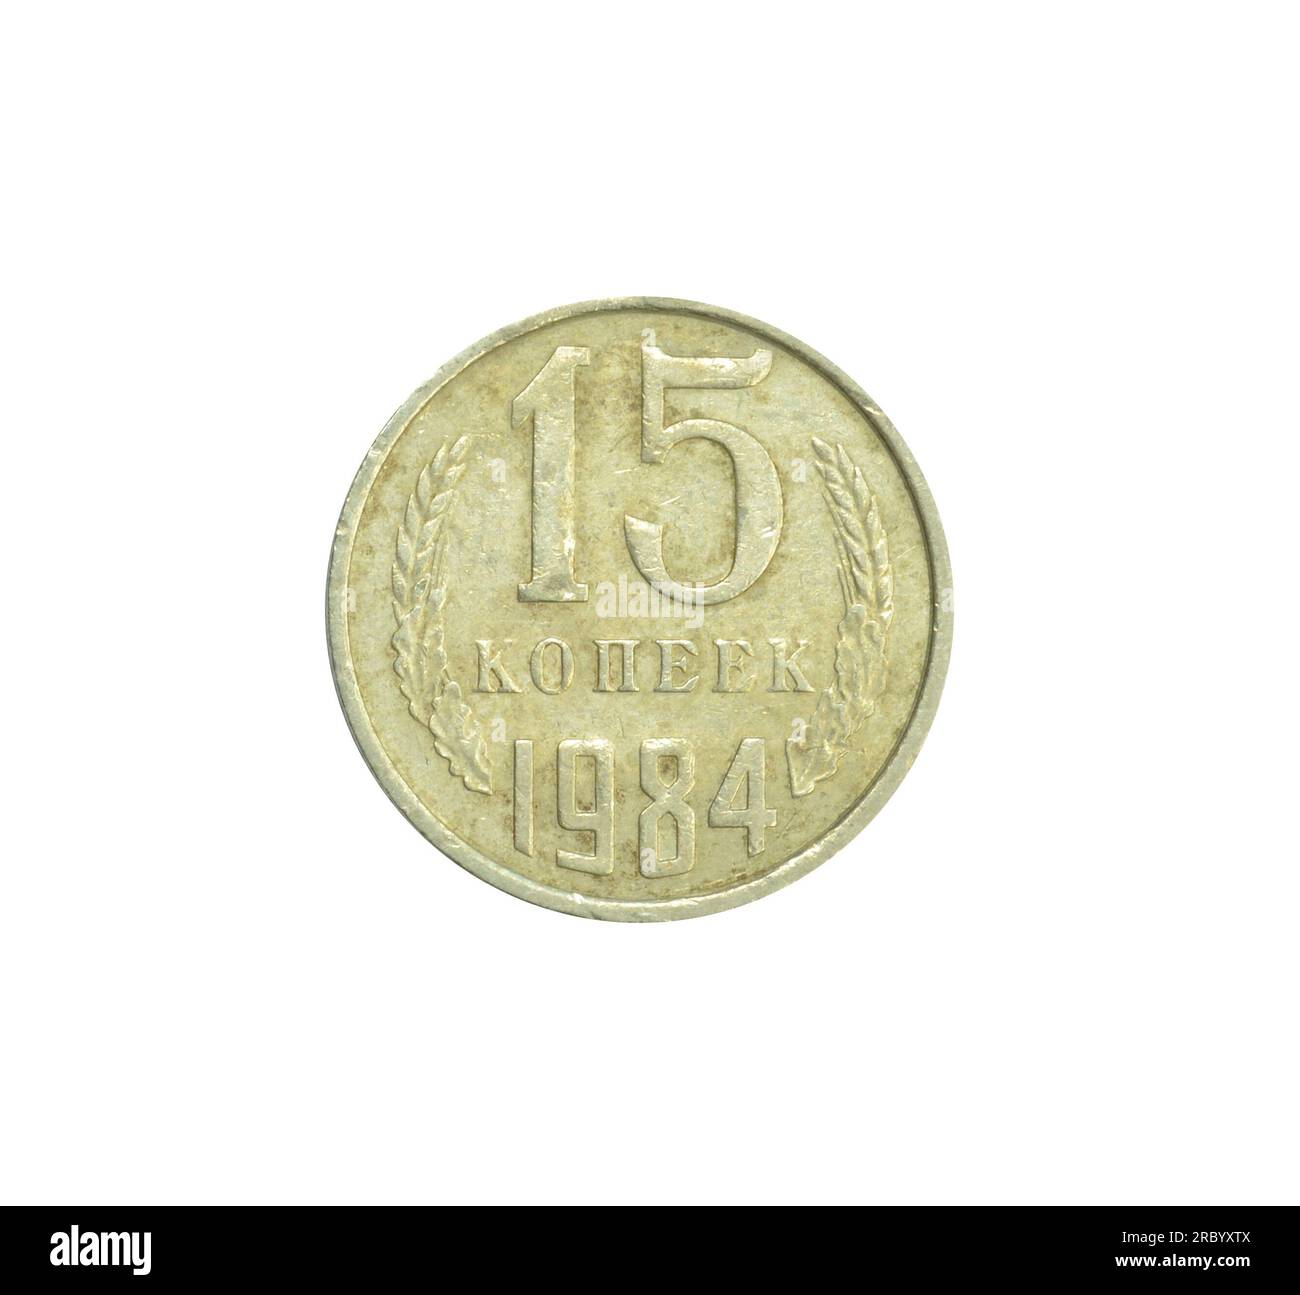 15 Kopeks coin made by Soviet Union in 1984, that shows Numeral value Stock Photo